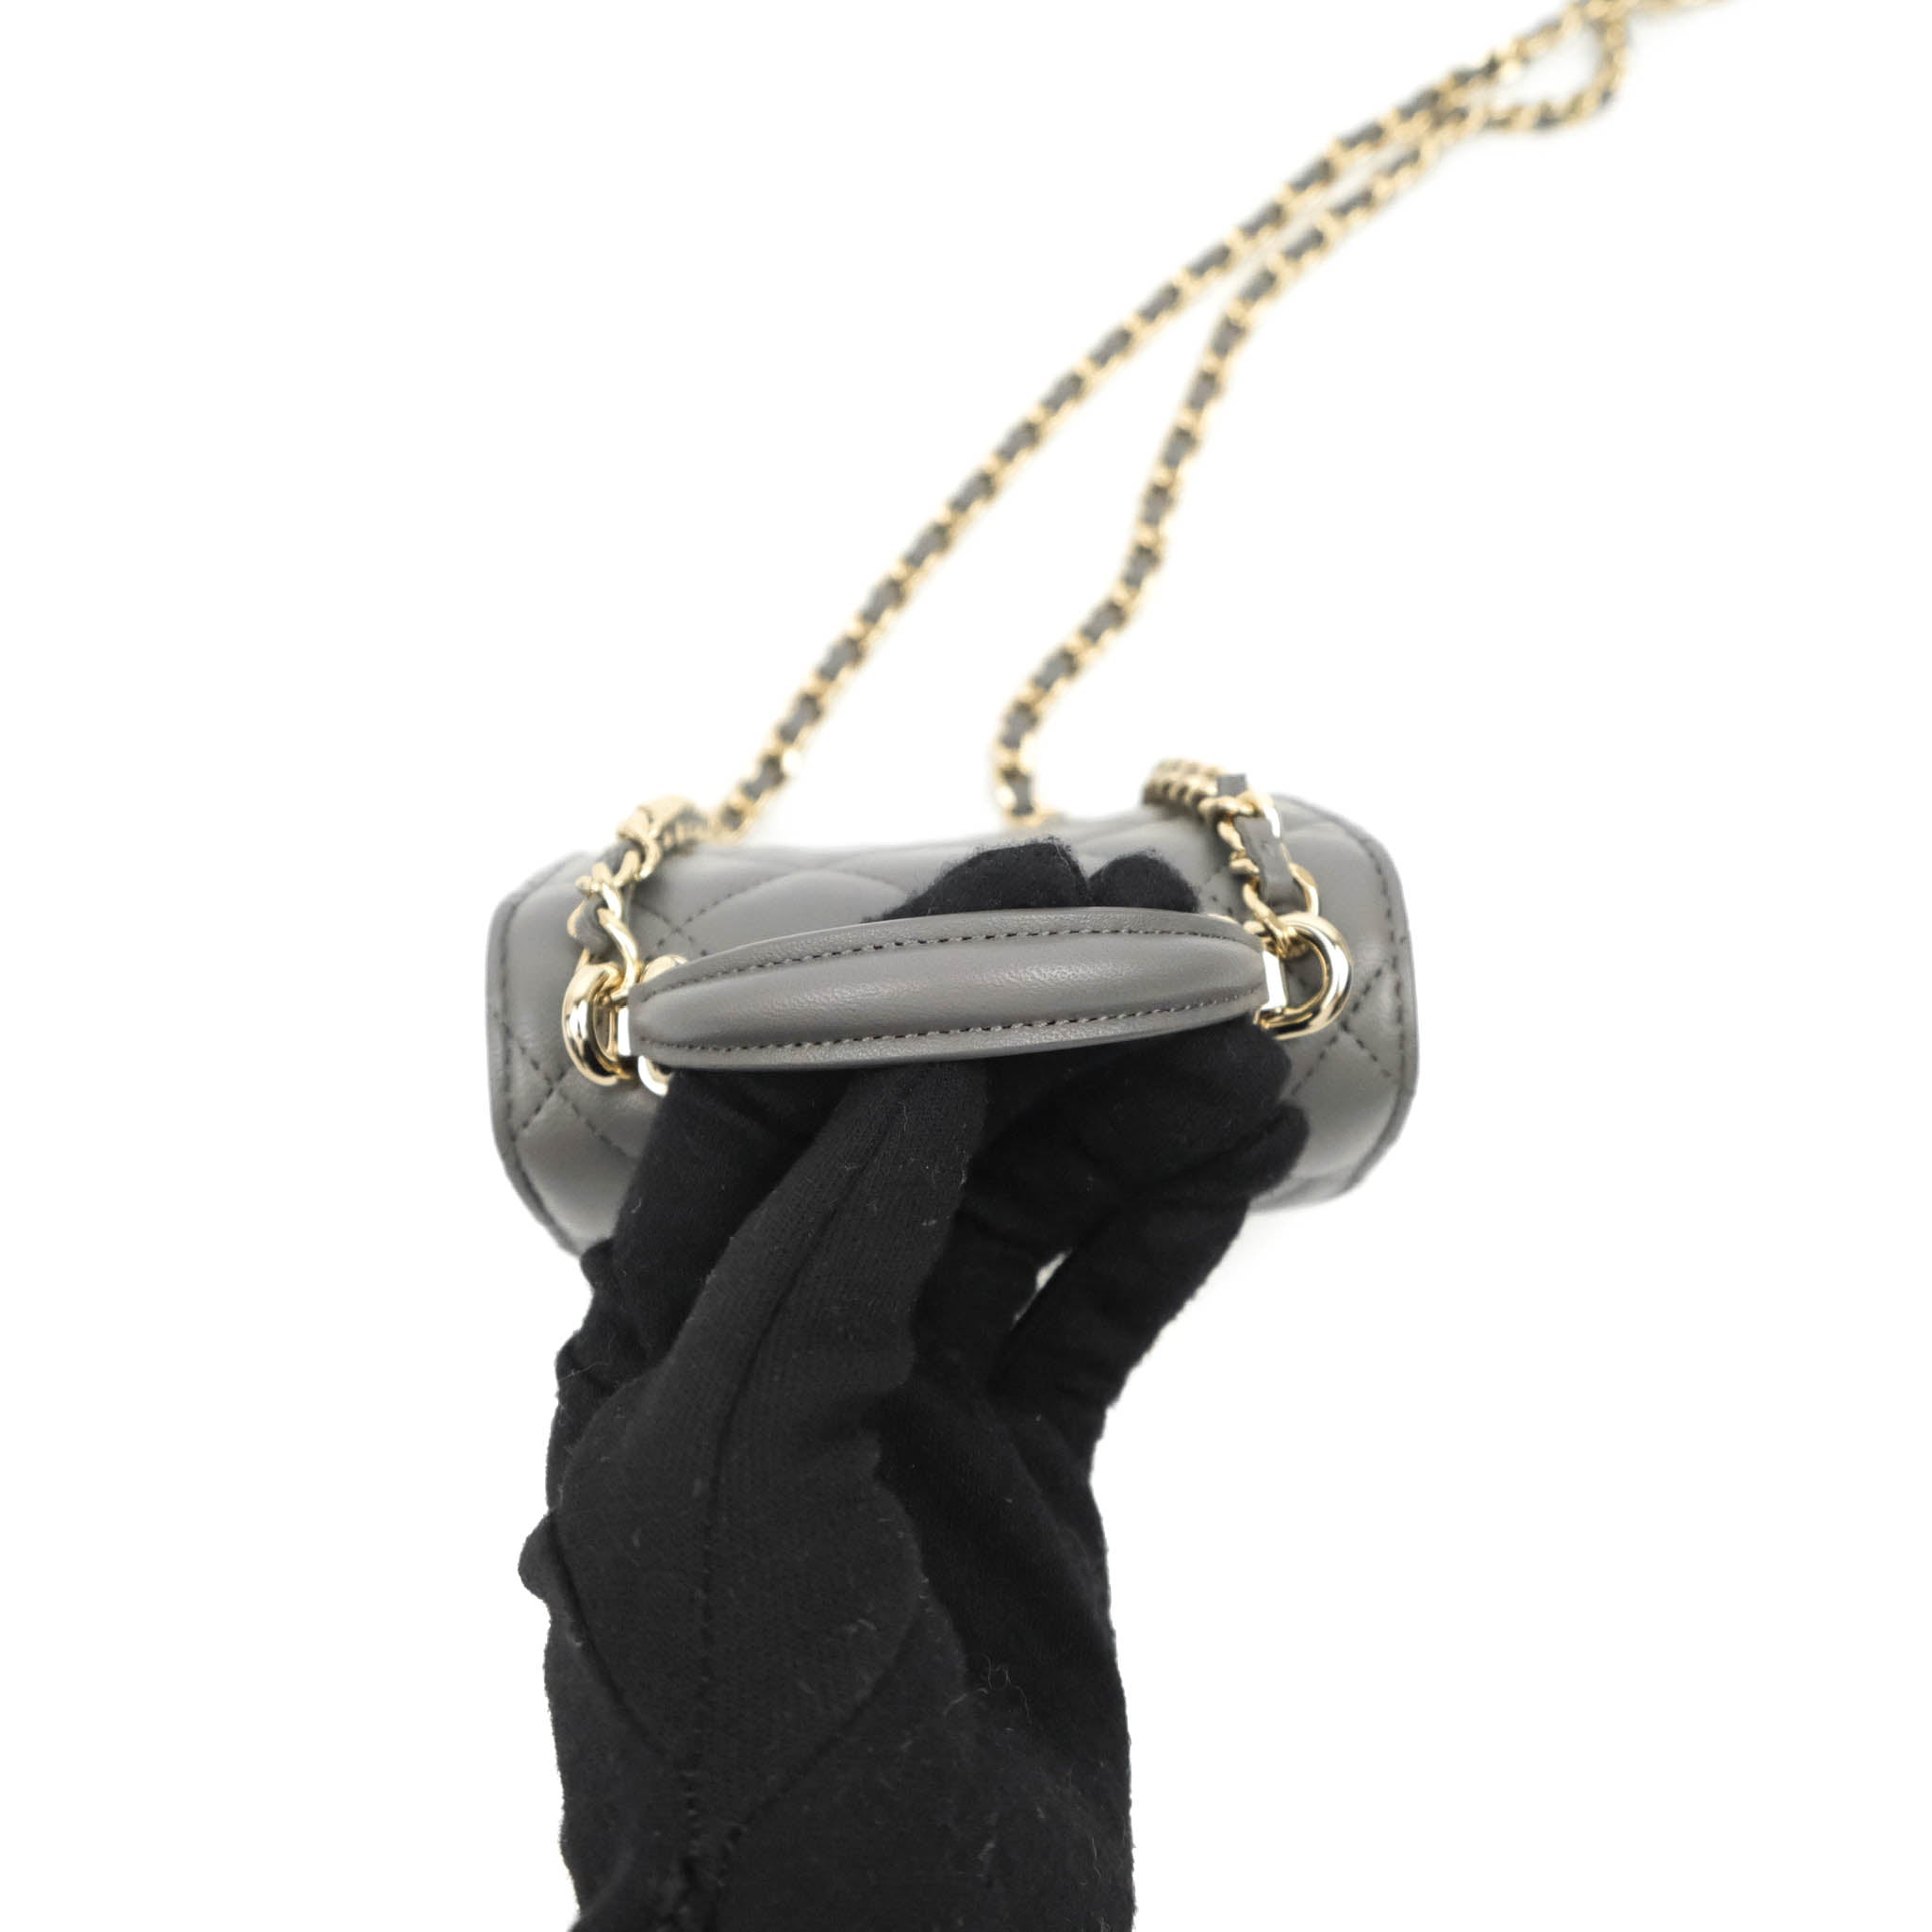 Chanel Coco Mail Clutch with Chain